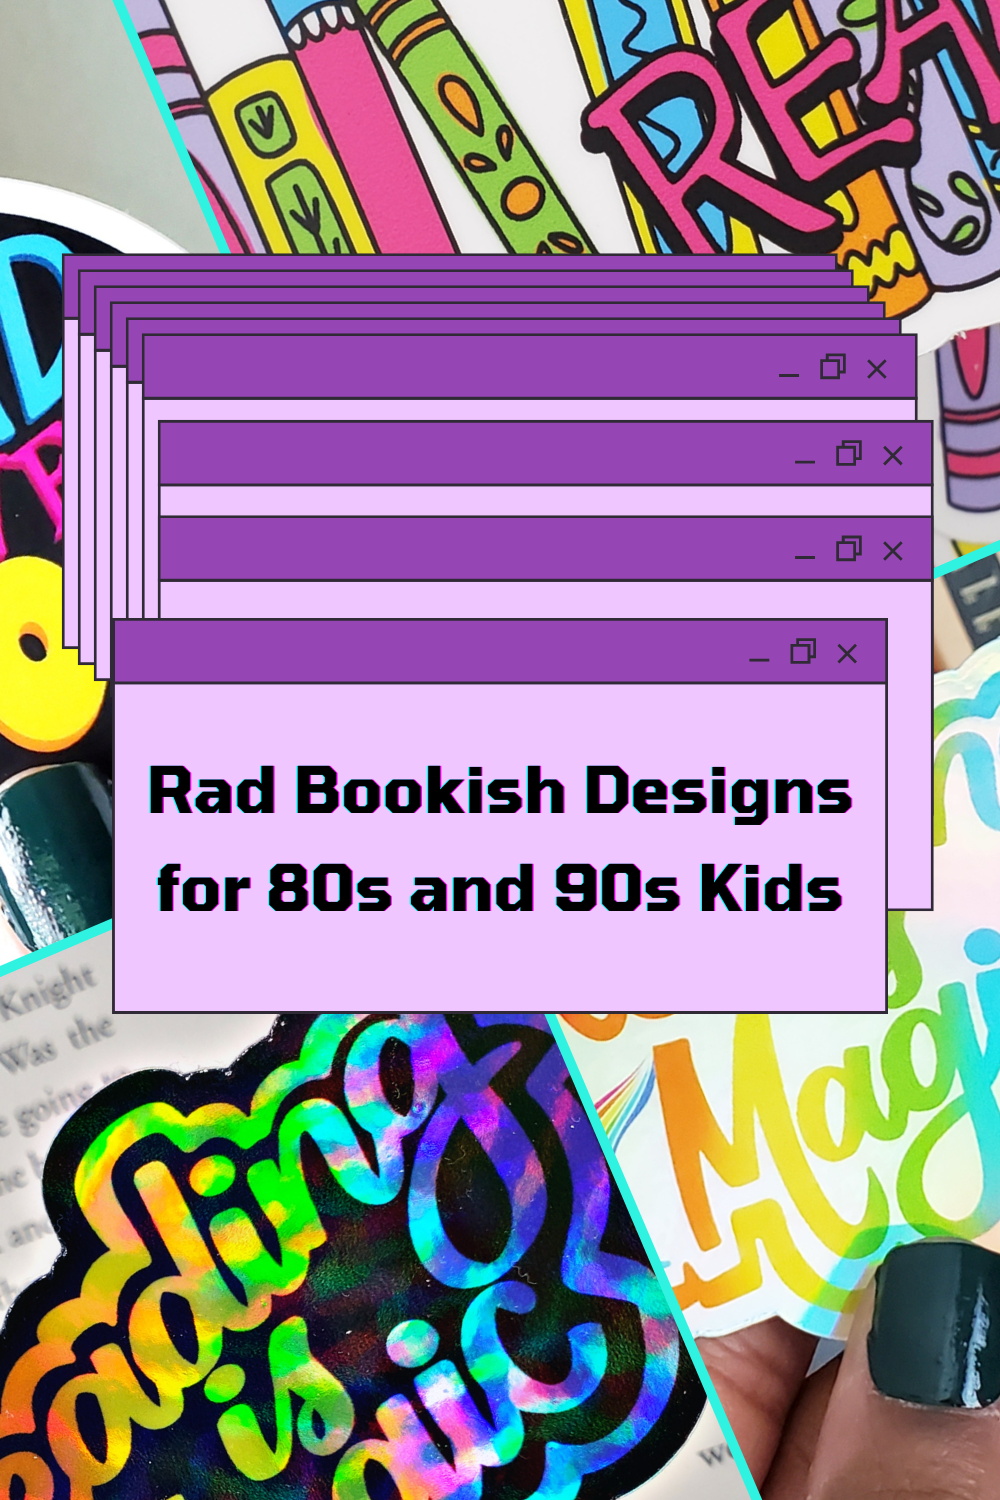 Rad Bookish Designs for 80s and 90s Kids